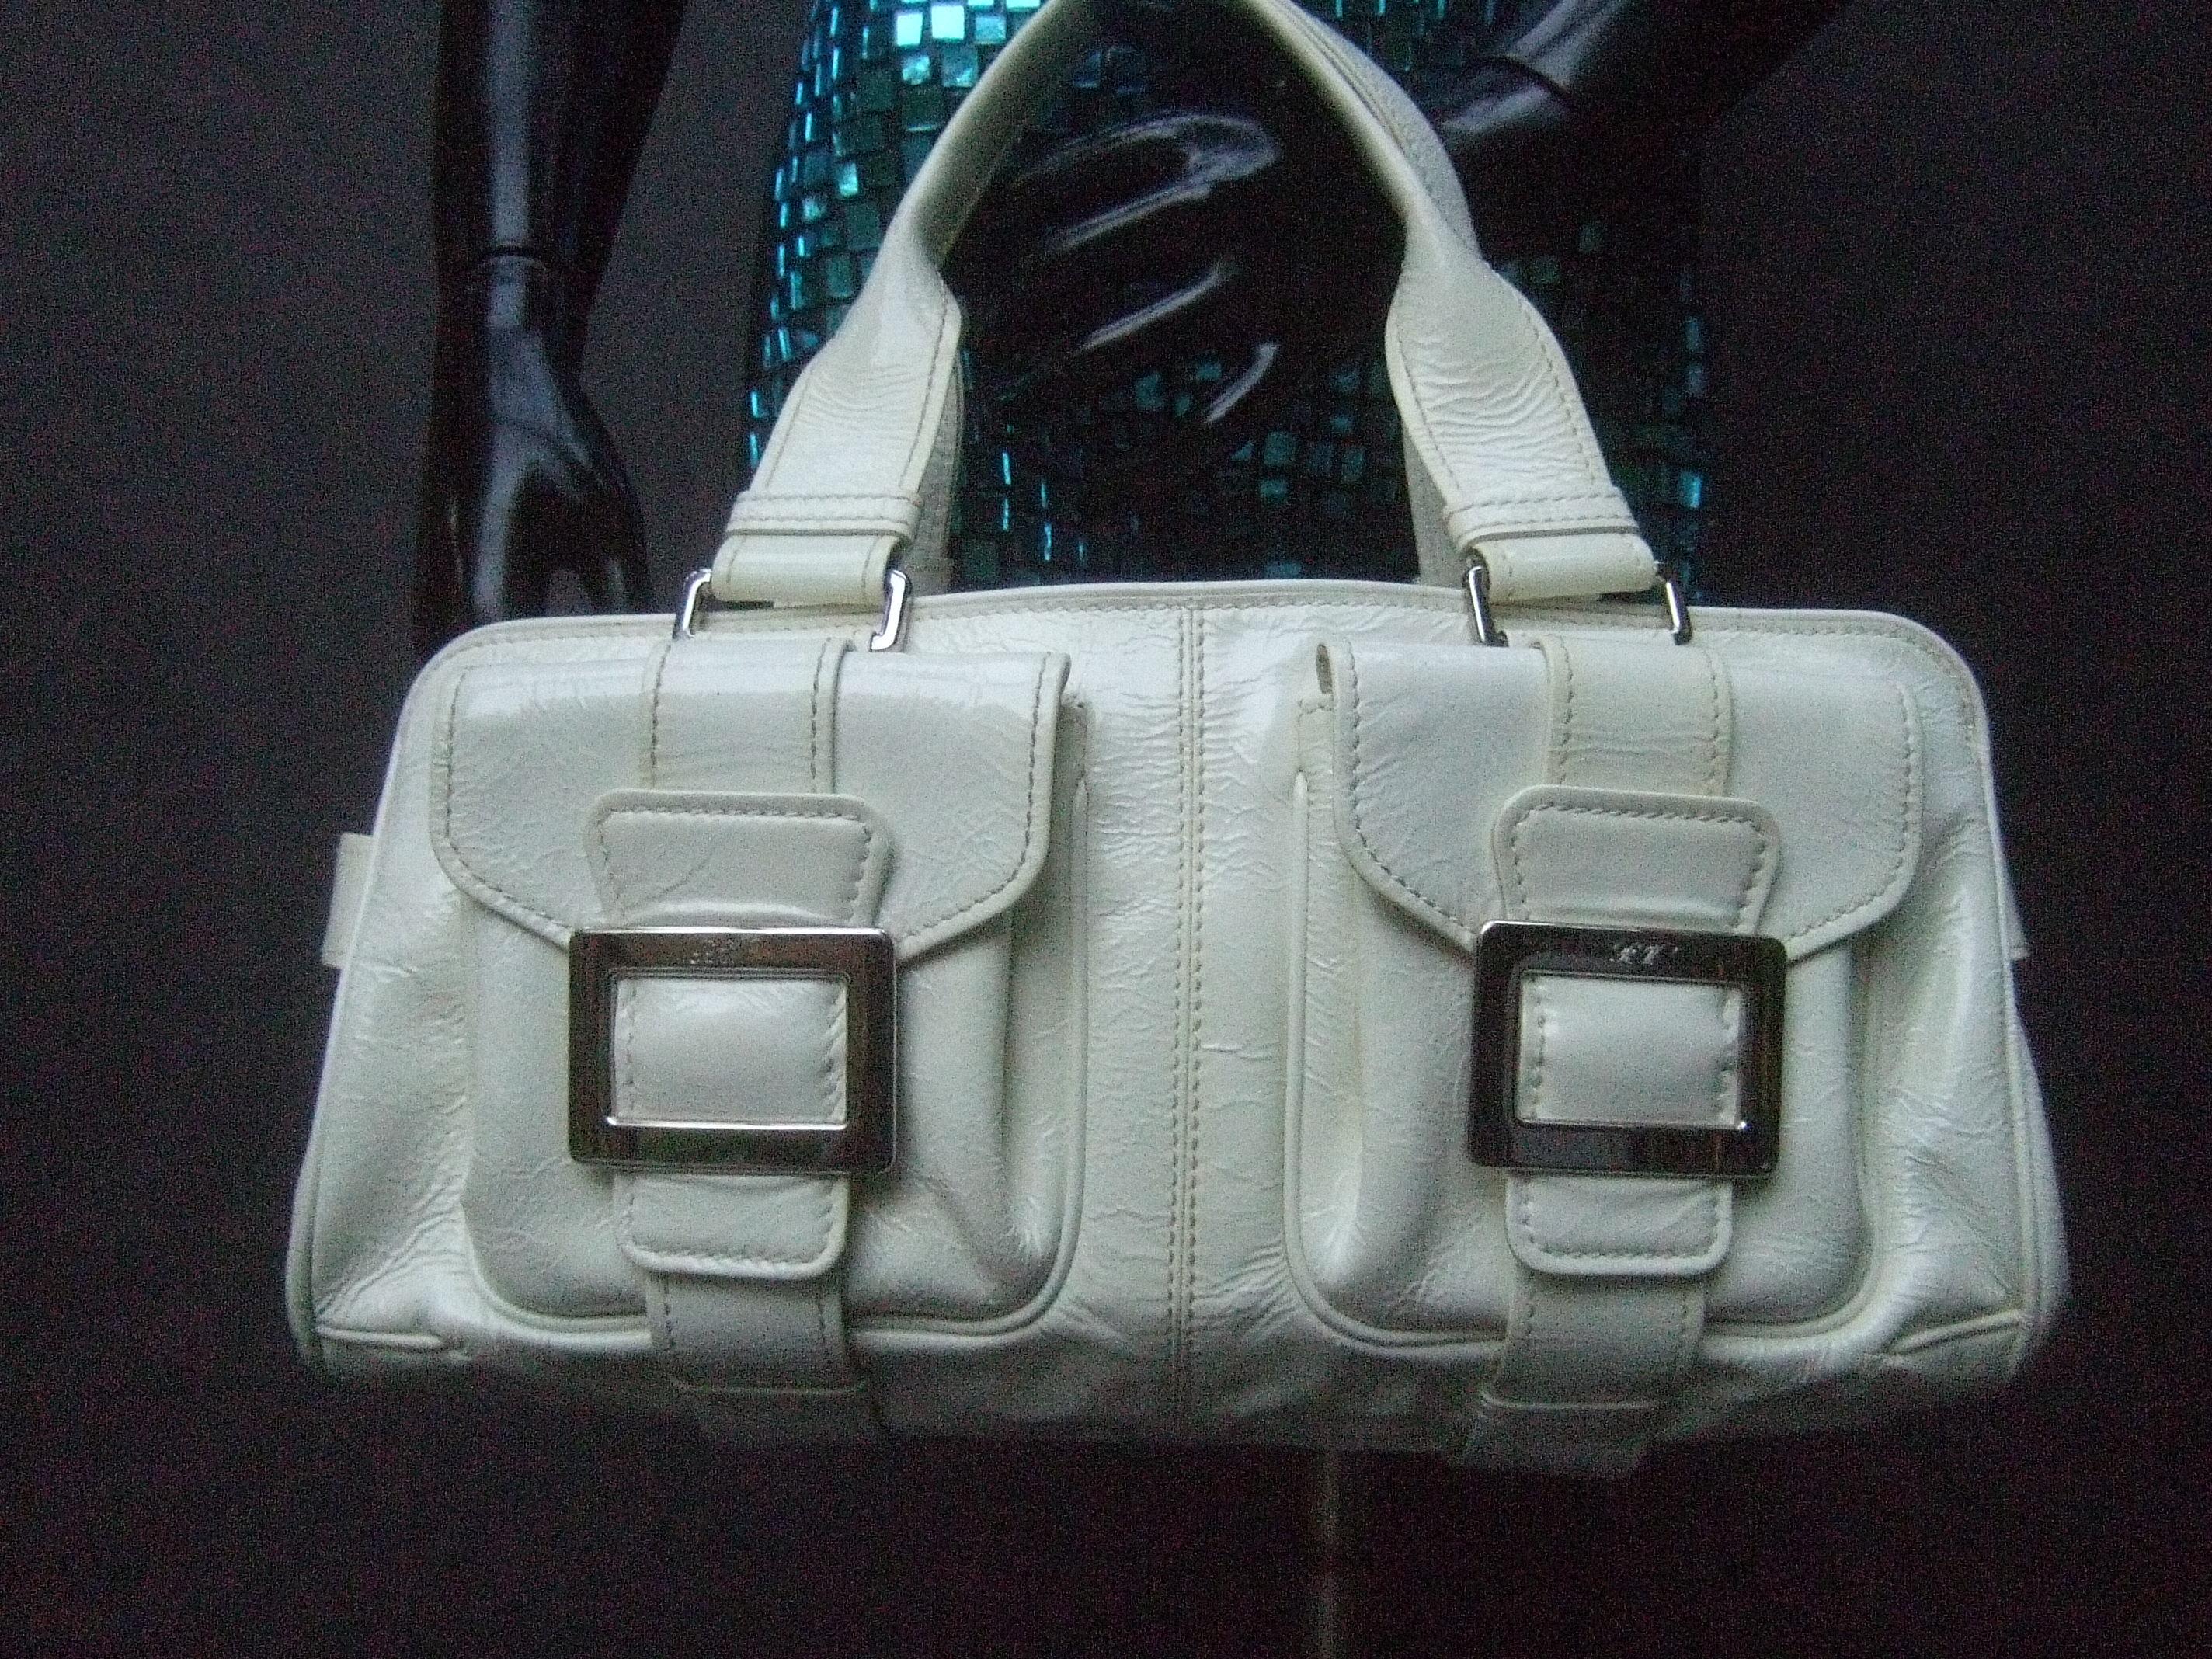 Roger Vivier Paris white patent leather chrome buckle Italian handbag c 1990s
The stylish handbag is designed with a pair of flap covered chrome buckle
pockets on the front exterior/ The pair of sleek chrome metal buckles are
engraved with Roger